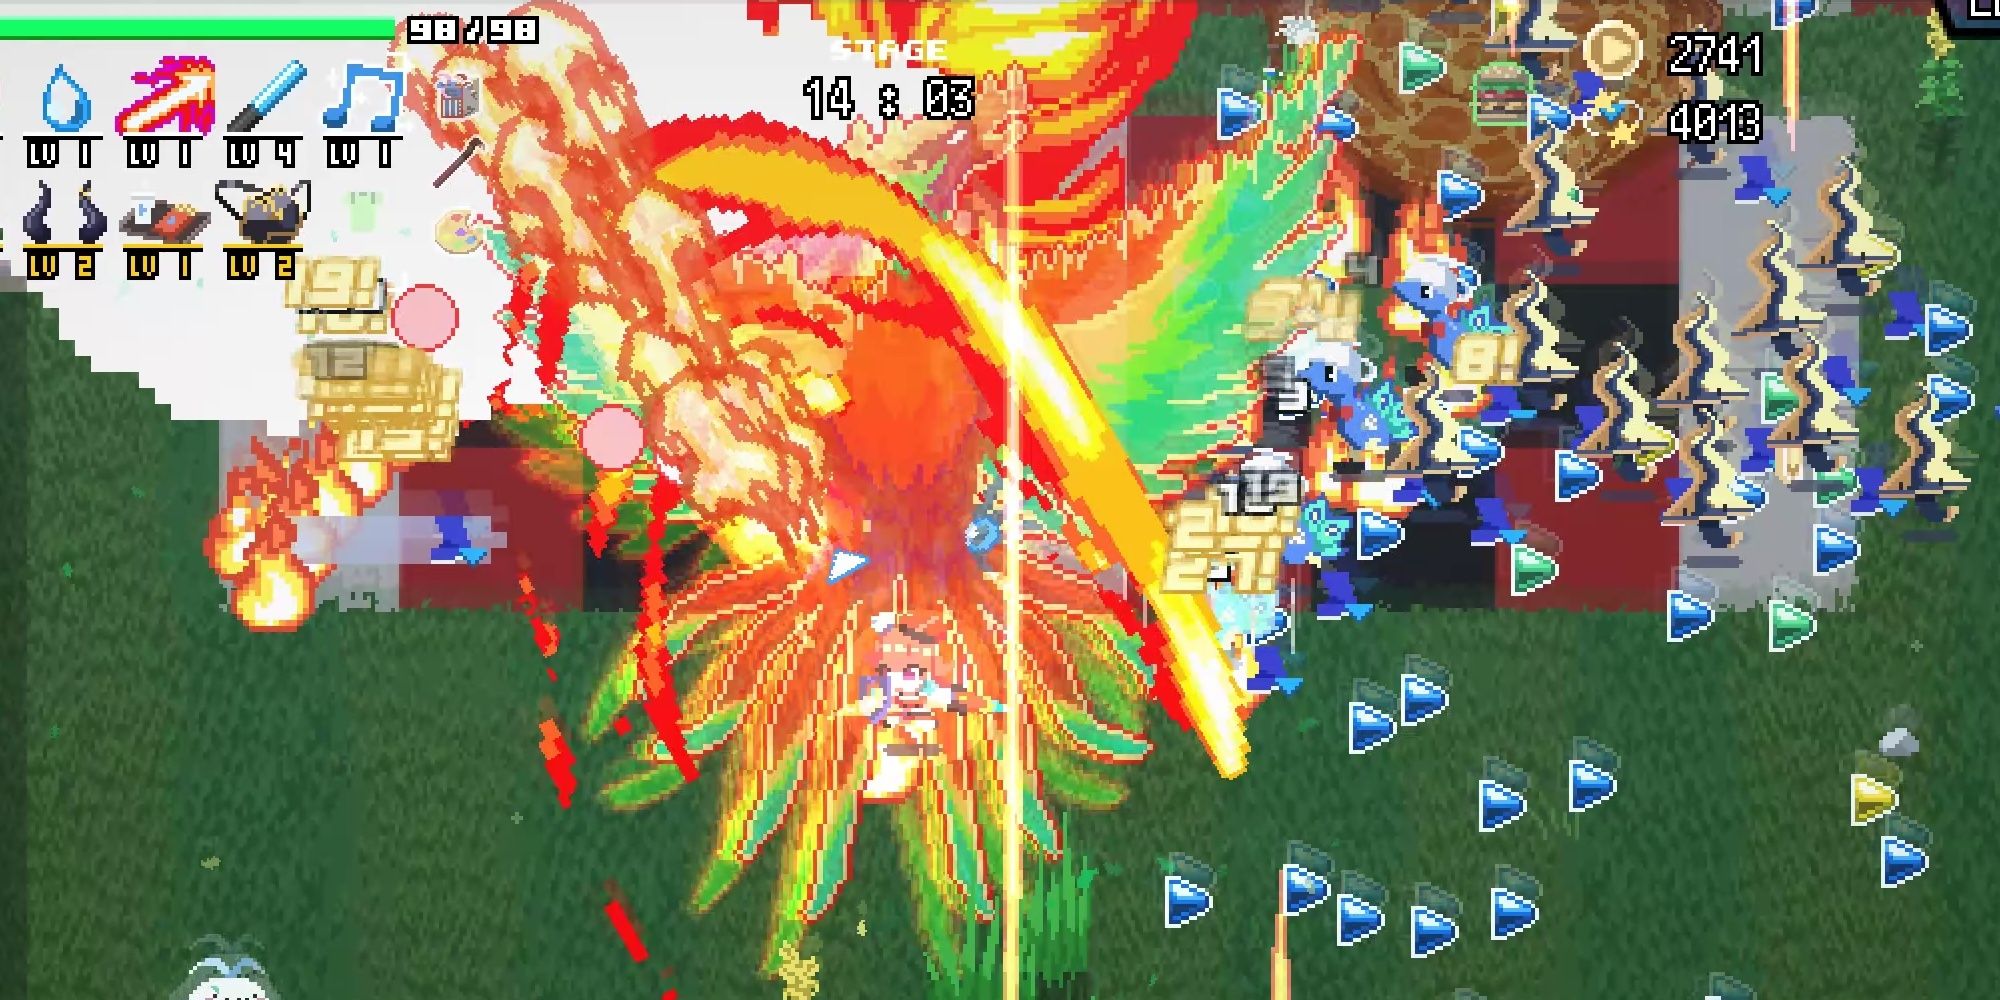 Kiara performing her special attack, which summons phoenix to blast the battlefield